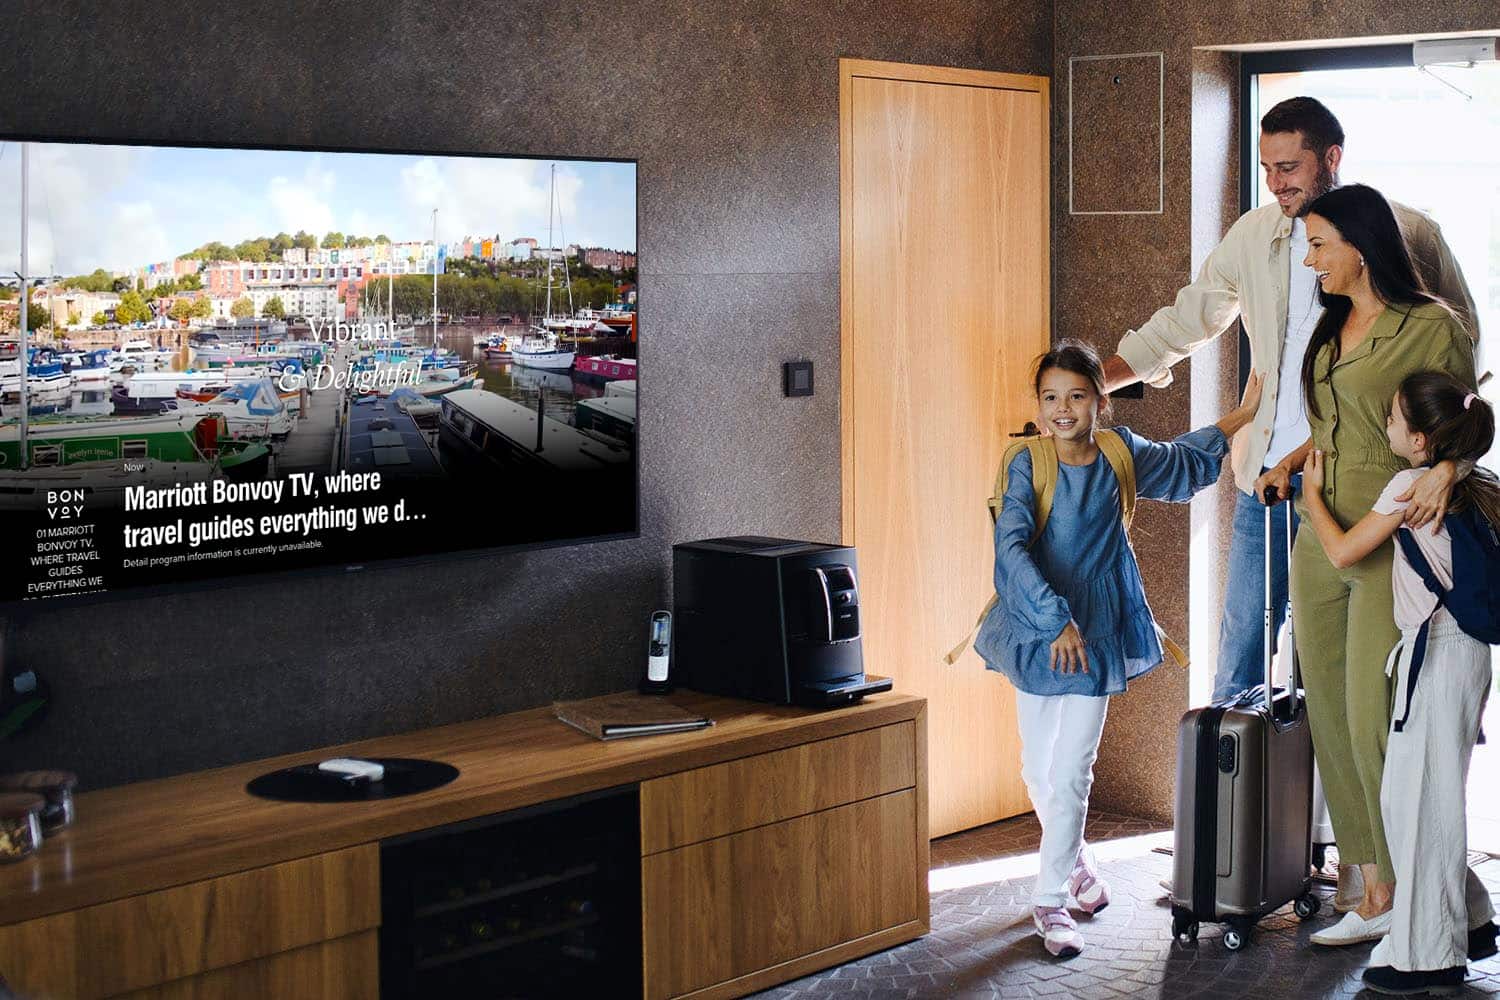 A family with two children entering a hotel room with a large TV screen displaying colorful marina imagery and text about Marriott Bonvoy TV.